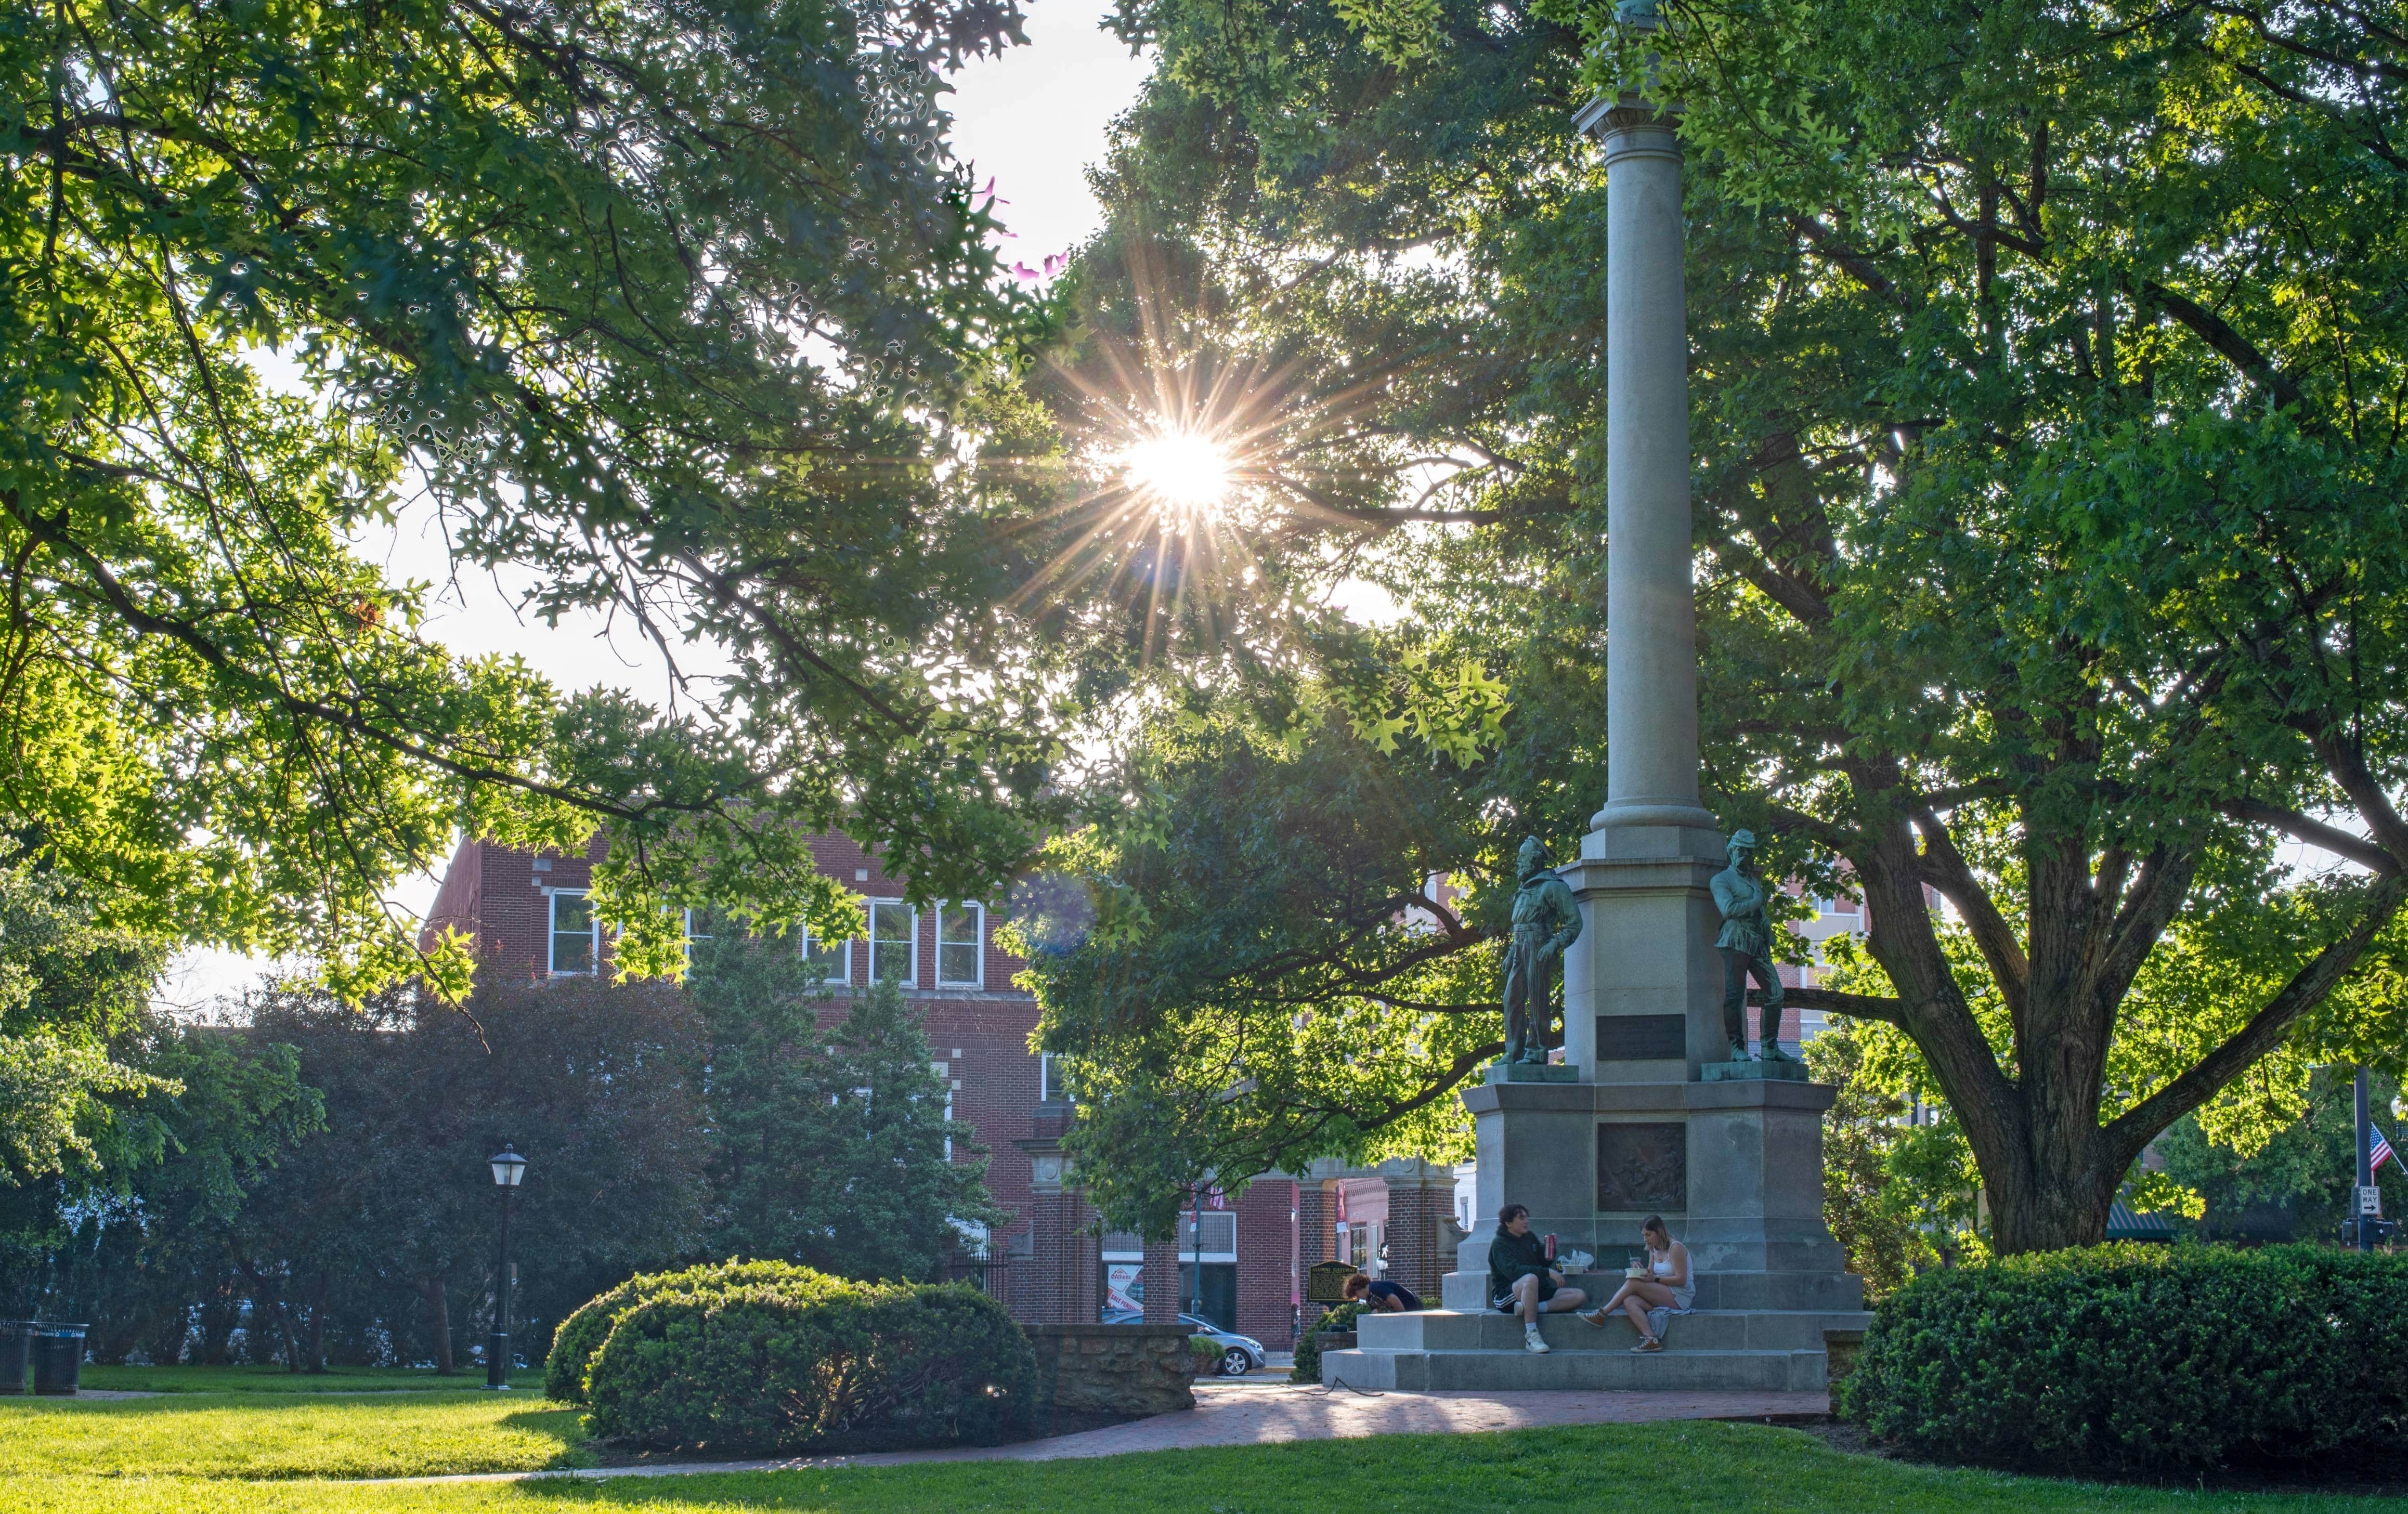 The monument as it appears today. Photo by Dylan Wayne Townsend, BSVC ‘24